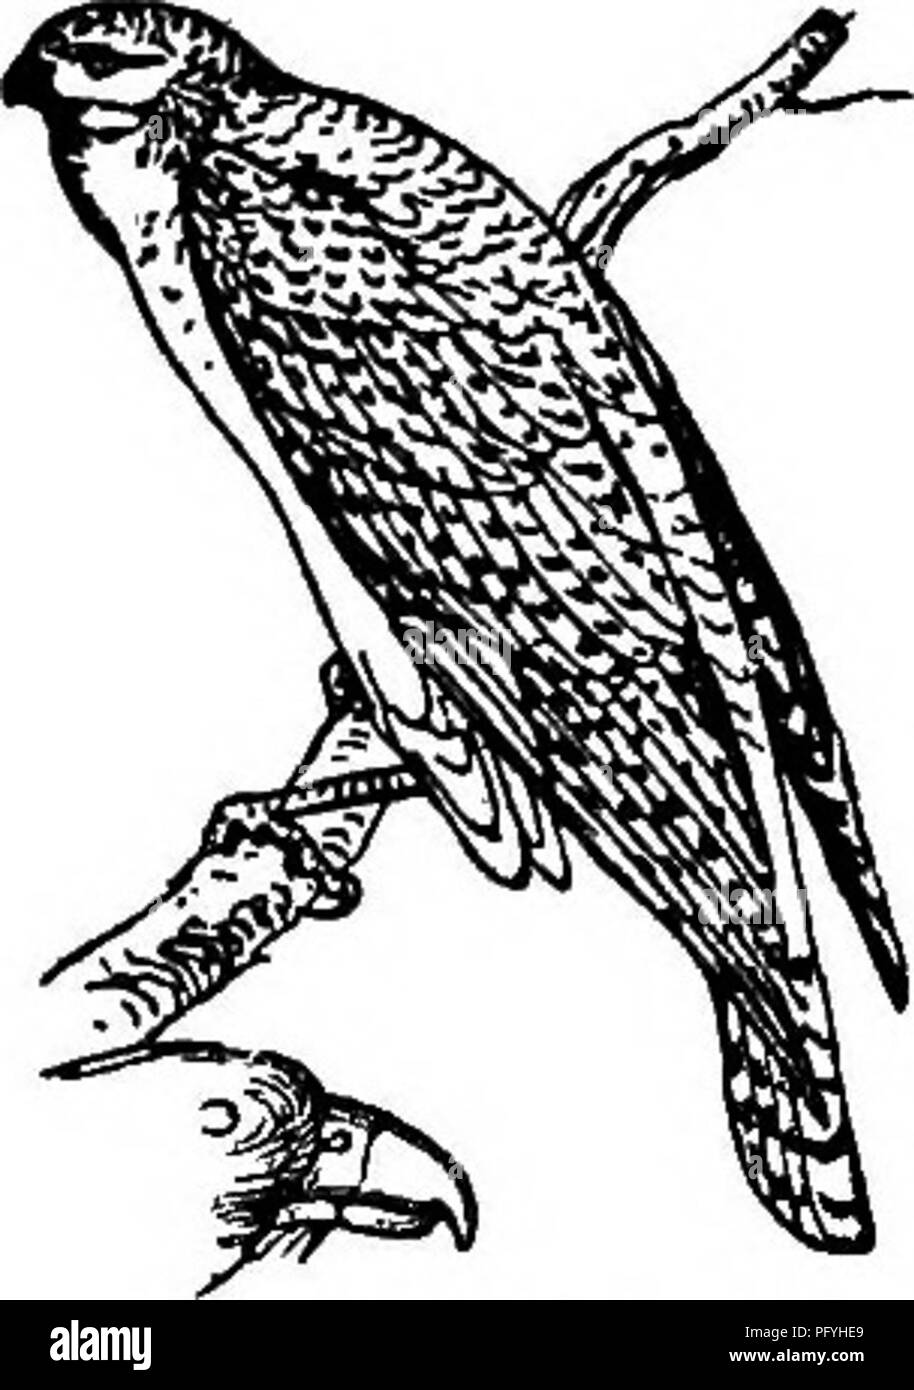 . Illustrated natural history : comprising descriptions of animals, birds, fishes, reptiles, insects, etc., with sketches of their peculiar habits and characteristics . Zoology. The Gyr-Falcon. islands of the Mediterranean Sea. It frequents high and rocky eminences, and about the end of February builds its nest in bold, precipitous clifis. There is hardly a part of the British coasts, where the cliflFs rise to the height of three or four hundred feet, in which falcons are not found scattered in the breeding season, and from which they seldom retire, except as occasional migrants. The Gyr-Falco Stock Photo